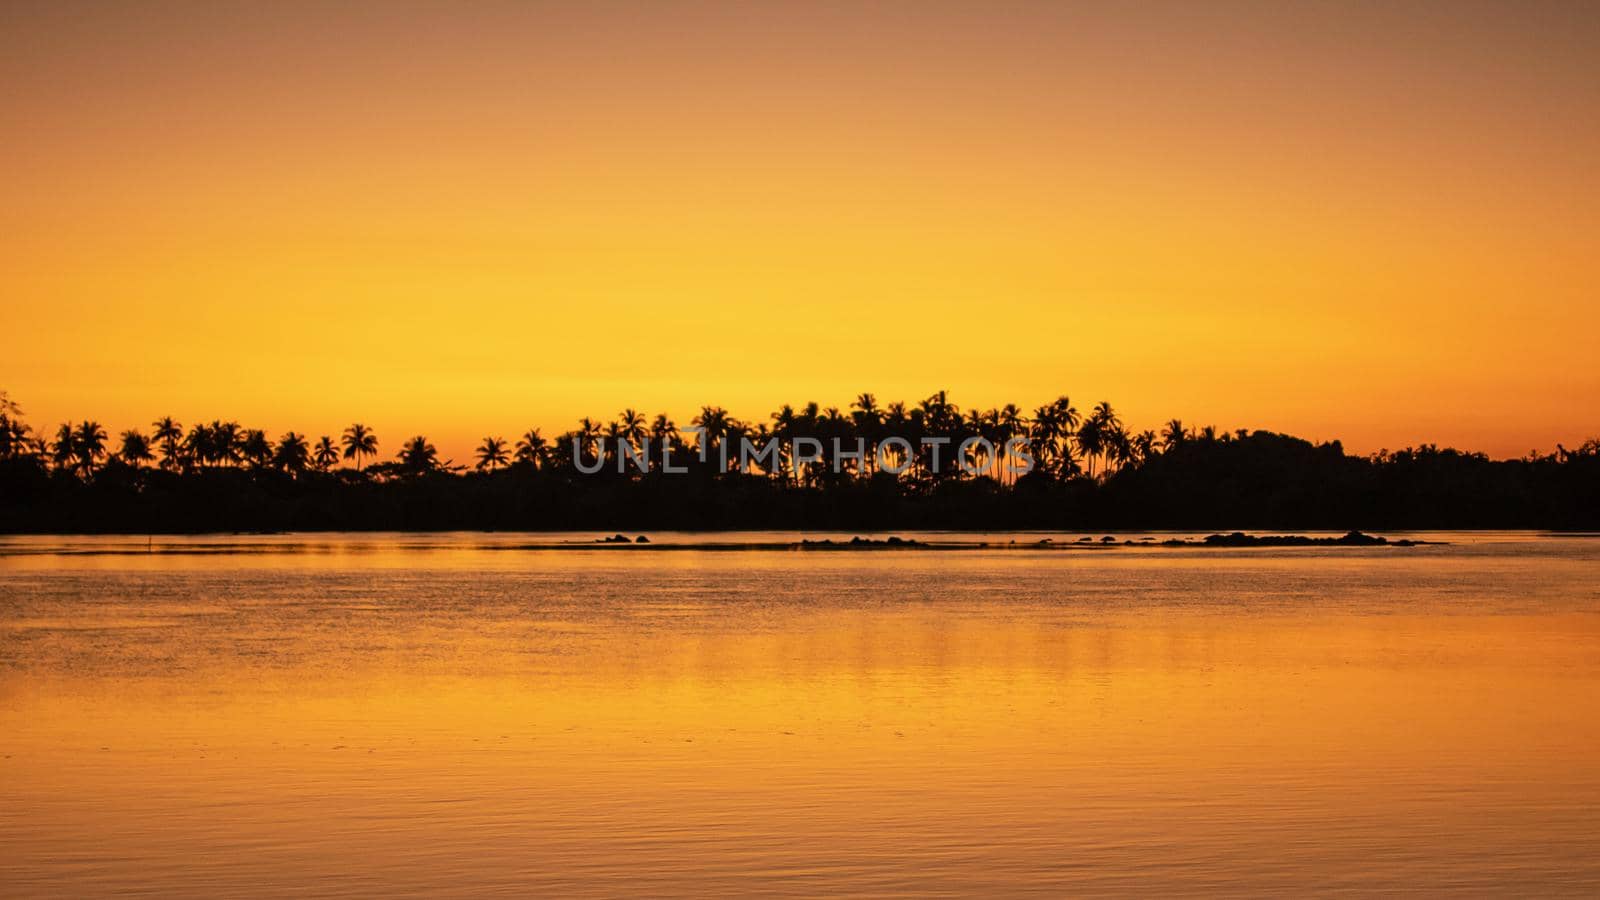 A bright orange sunset sky reflecting in the calm ocean near Ngwesaung, Myanmar by arvidnorberg